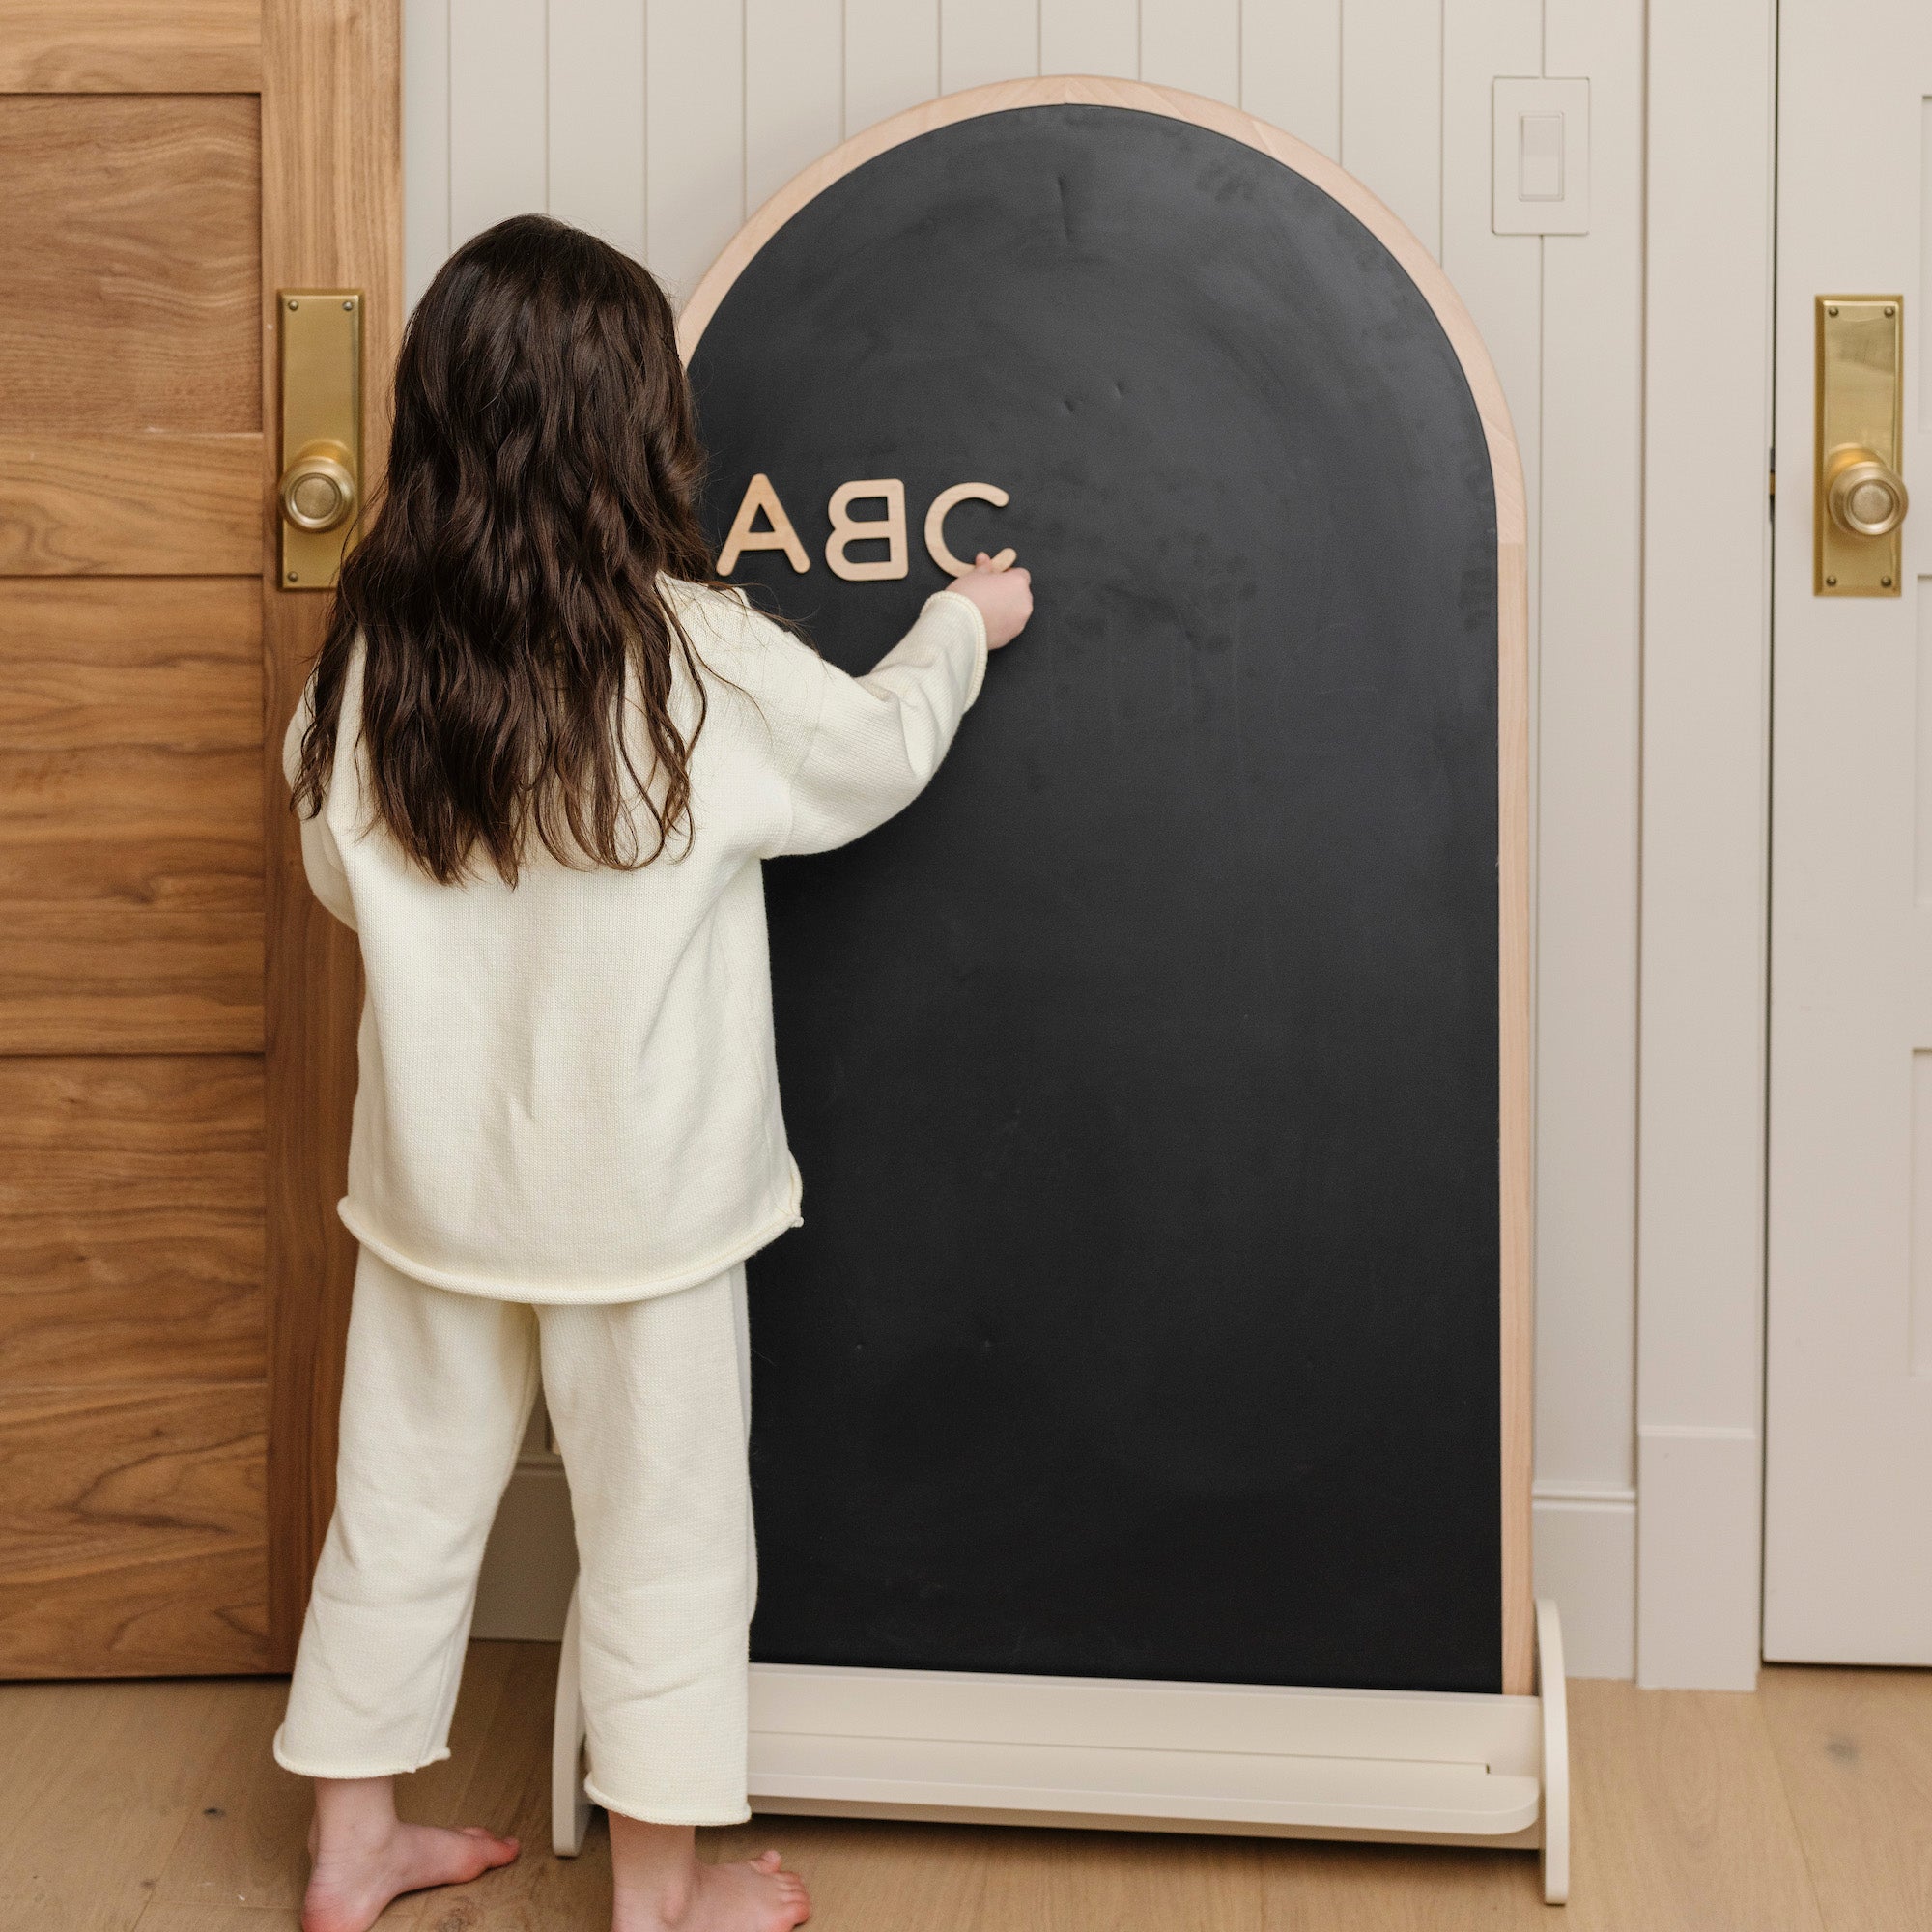 @Kid playing with the Arched Chalkboard + Wooden Numbers.